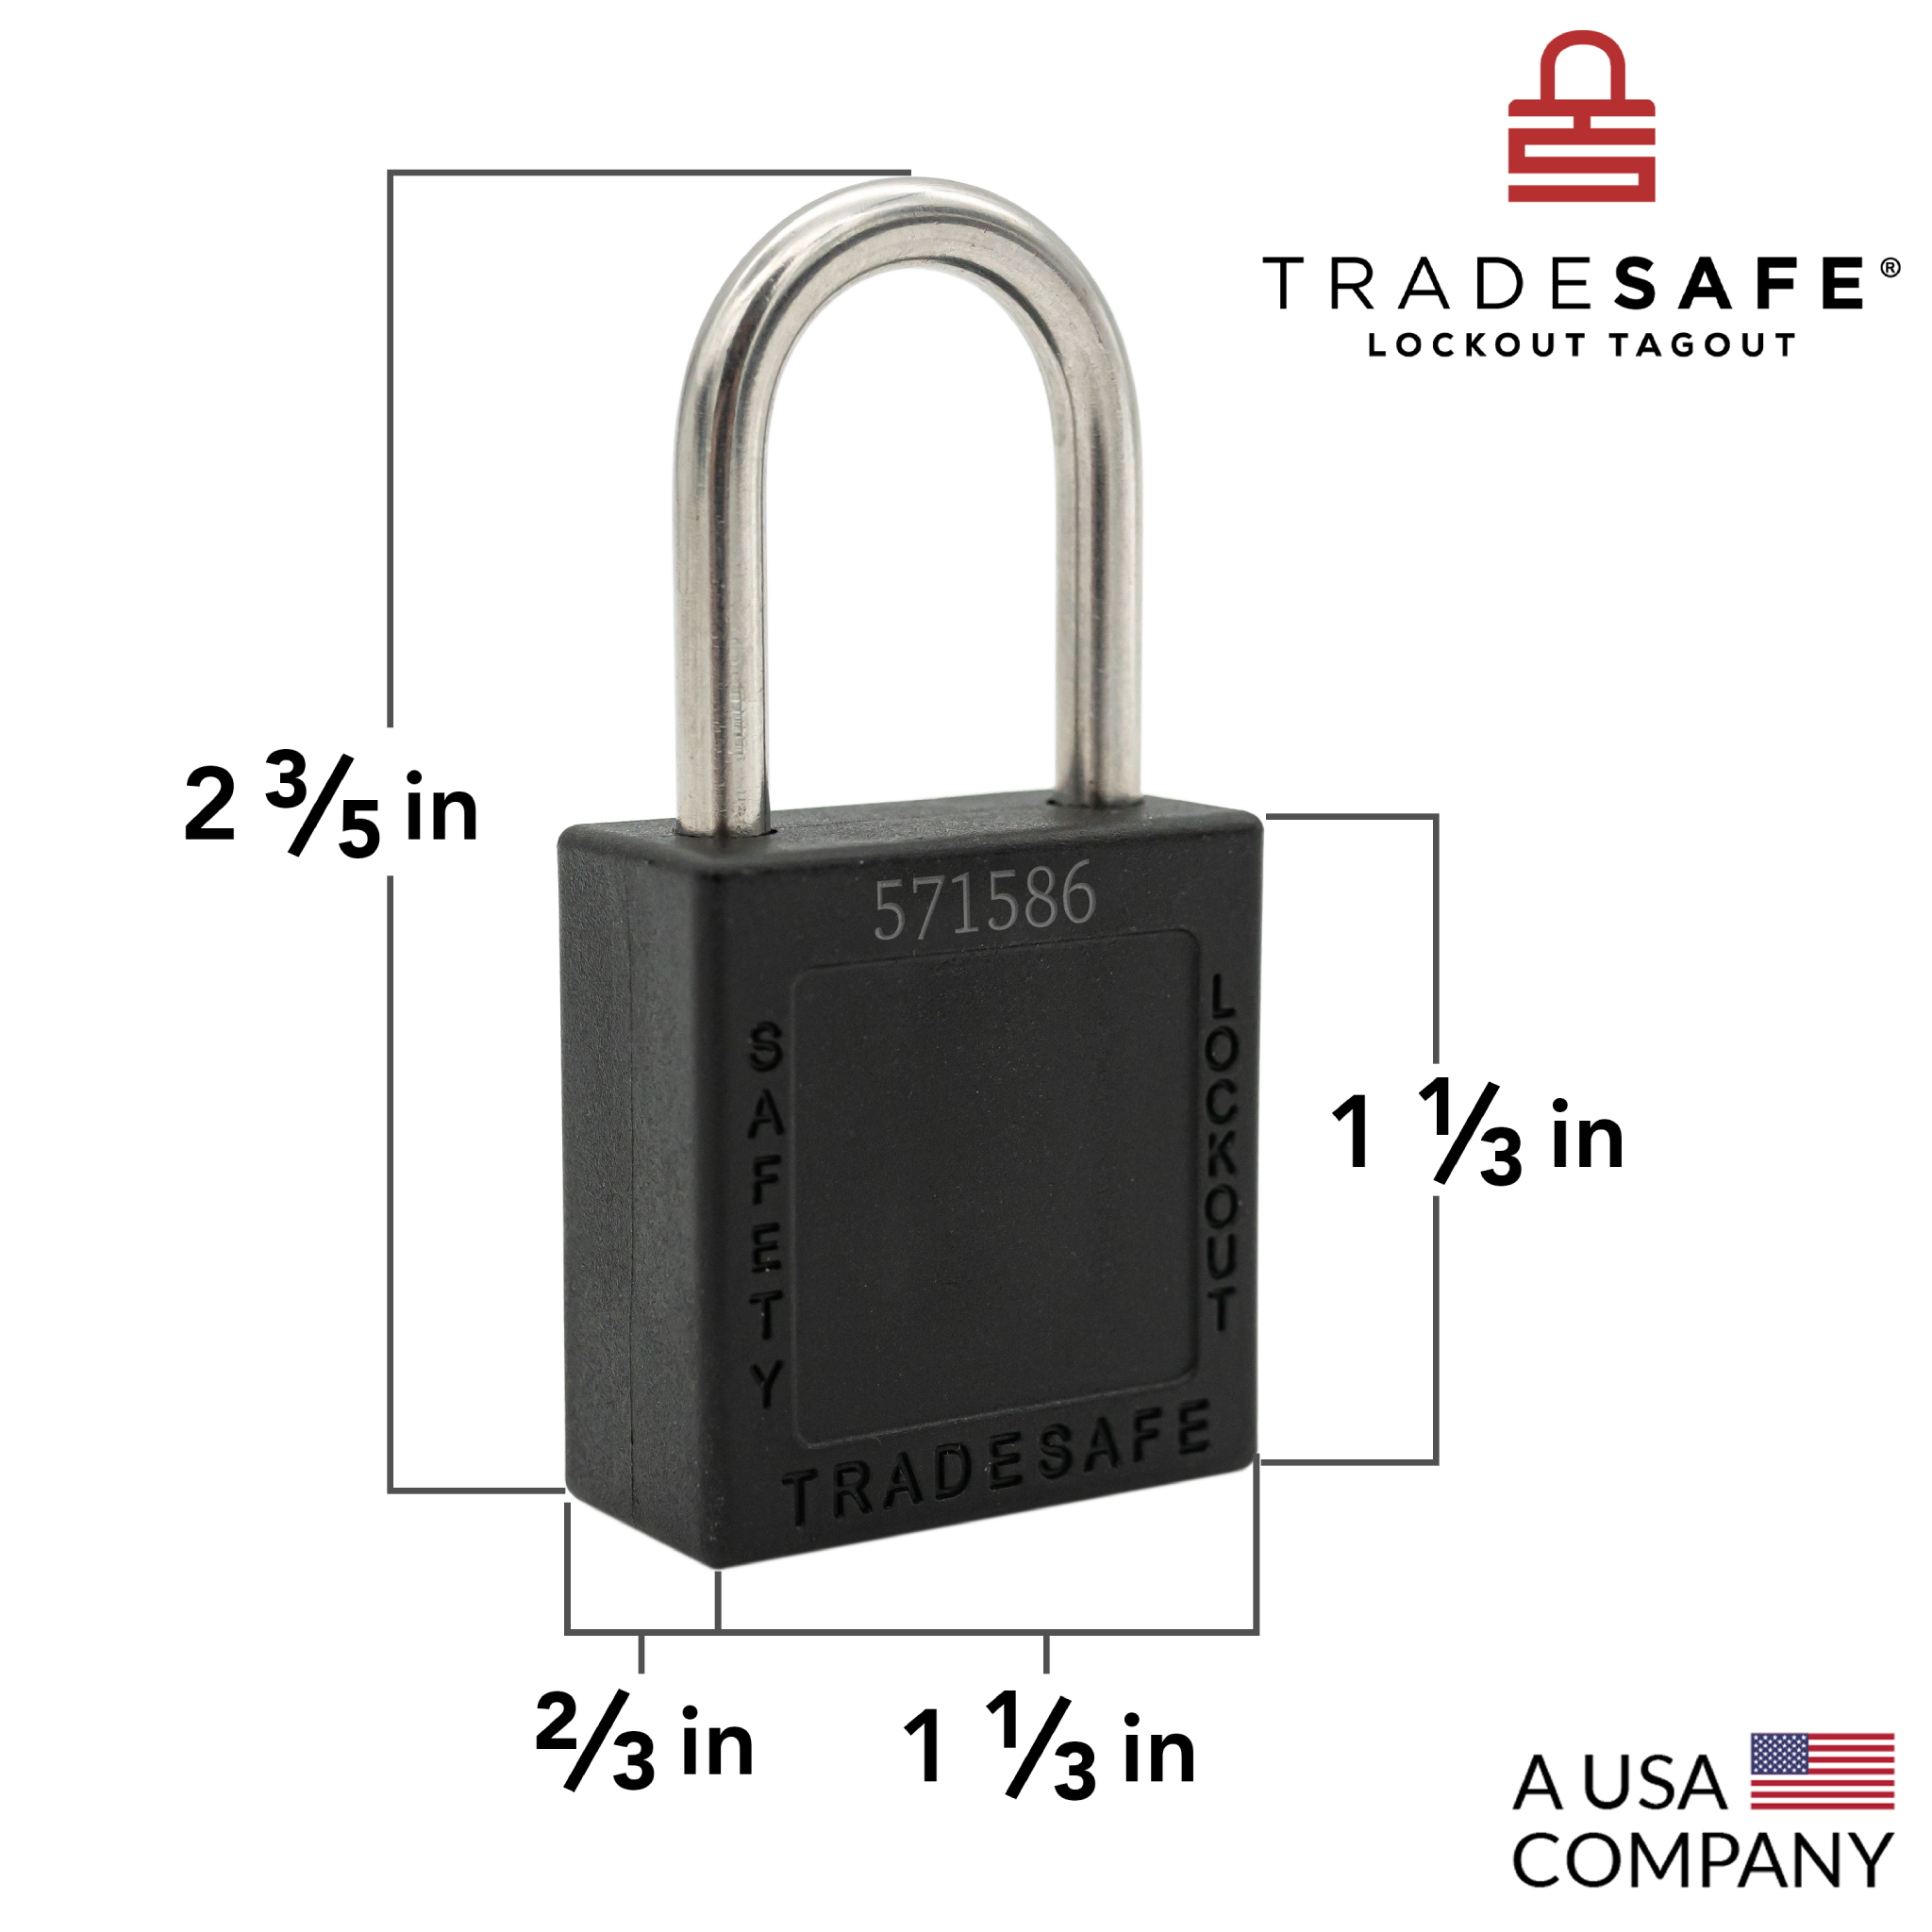 Outdoor Faucet Lock with Safety Padlock - 2 Keys